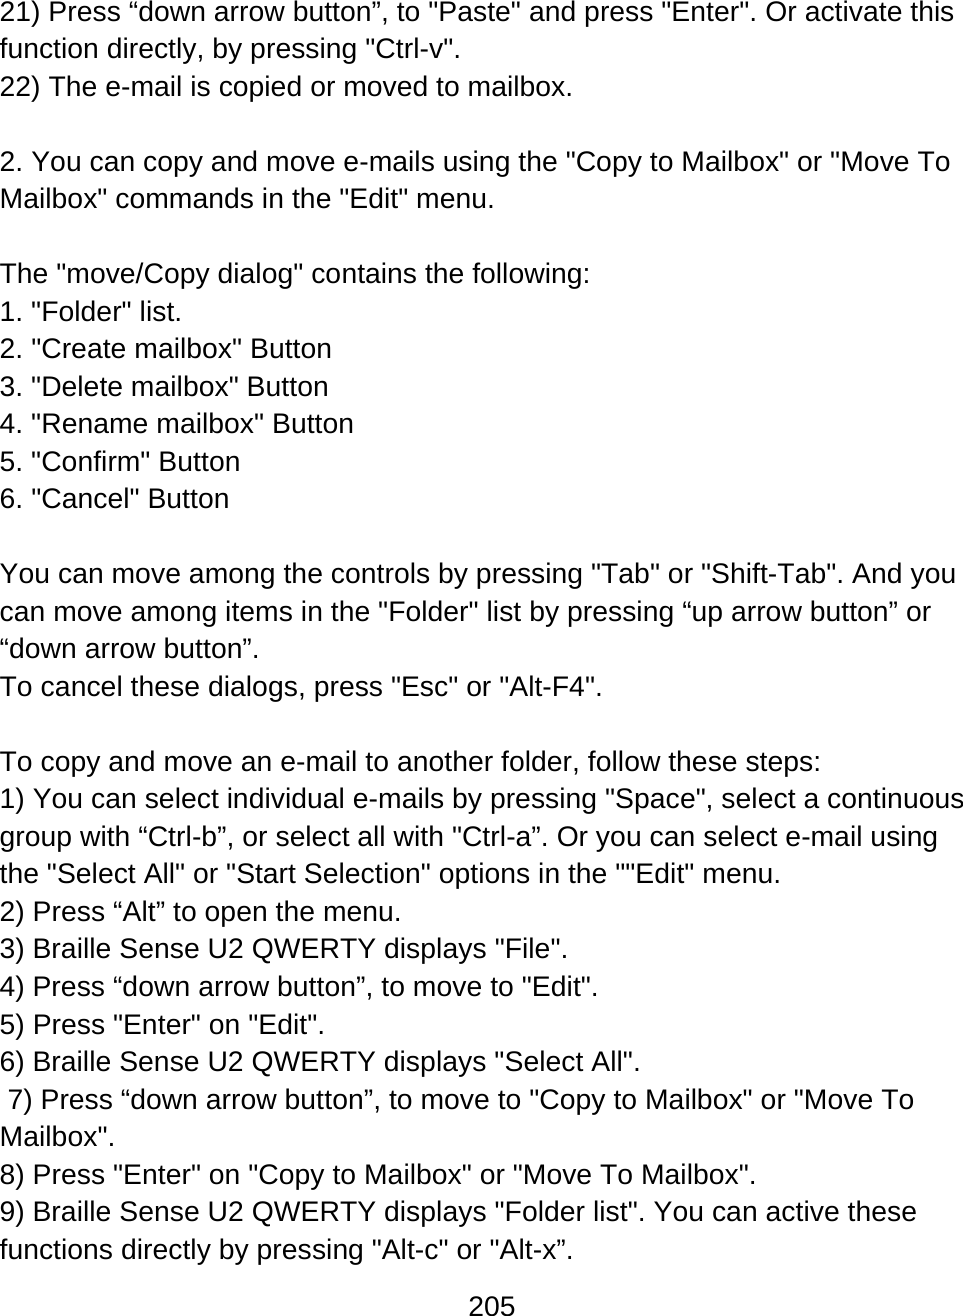 205  21) Press “down arrow button”, to &quot;Paste&quot; and press &quot;Enter&quot;. Or activate this function directly, by pressing &quot;Ctrl-v&quot;. 22) The e-mail is copied or moved to mailbox.  2. You can copy and move e-mails using the &quot;Copy to Mailbox&quot; or &quot;Move To Mailbox&quot; commands in the &quot;Edit&quot; menu.  The &quot;move/Copy dialog&quot; contains the following: 1. &quot;Folder&quot; list. 2. &quot;Create mailbox&quot; Button 3. &quot;Delete mailbox&quot; Button 4. &quot;Rename mailbox&quot; Button 5. &quot;Confirm&quot; Button 6. &quot;Cancel&quot; Button  You can move among the controls by pressing &quot;Tab&quot; or &quot;Shift-Tab&quot;. And you can move among items in the &quot;Folder&quot; list by pressing “up arrow button” or “down arrow button”.  To cancel these dialogs, press &quot;Esc&quot; or &quot;Alt-F4&quot;.  To copy and move an e-mail to another folder, follow these steps: 1) You can select individual e-mails by pressing &quot;Space&quot;, select a continuous group with “Ctrl-b”, or select all with &quot;Ctrl-a”. Or you can select e-mail using the &quot;Select All&quot; or &quot;Start Selection&quot; options in the &quot;&quot;Edit&quot; menu. 2) Press “Alt” to open the menu. 3) Braille Sense U2 QWERTY displays &quot;File&quot;. 4) Press “down arrow button”, to move to &quot;Edit&quot;. 5) Press &quot;Enter&quot; on &quot;Edit&quot;. 6) Braille Sense U2 QWERTY displays &quot;Select All&quot;.  7) Press “down arrow button”, to move to &quot;Copy to Mailbox&quot; or &quot;Move To Mailbox&quot;. 8) Press &quot;Enter&quot; on &quot;Copy to Mailbox&quot; or &quot;Move To Mailbox&quot;. 9) Braille Sense U2 QWERTY displays &quot;Folder list&quot;. You can active these functions directly by pressing &quot;Alt-c&quot; or &quot;Alt-x”. 